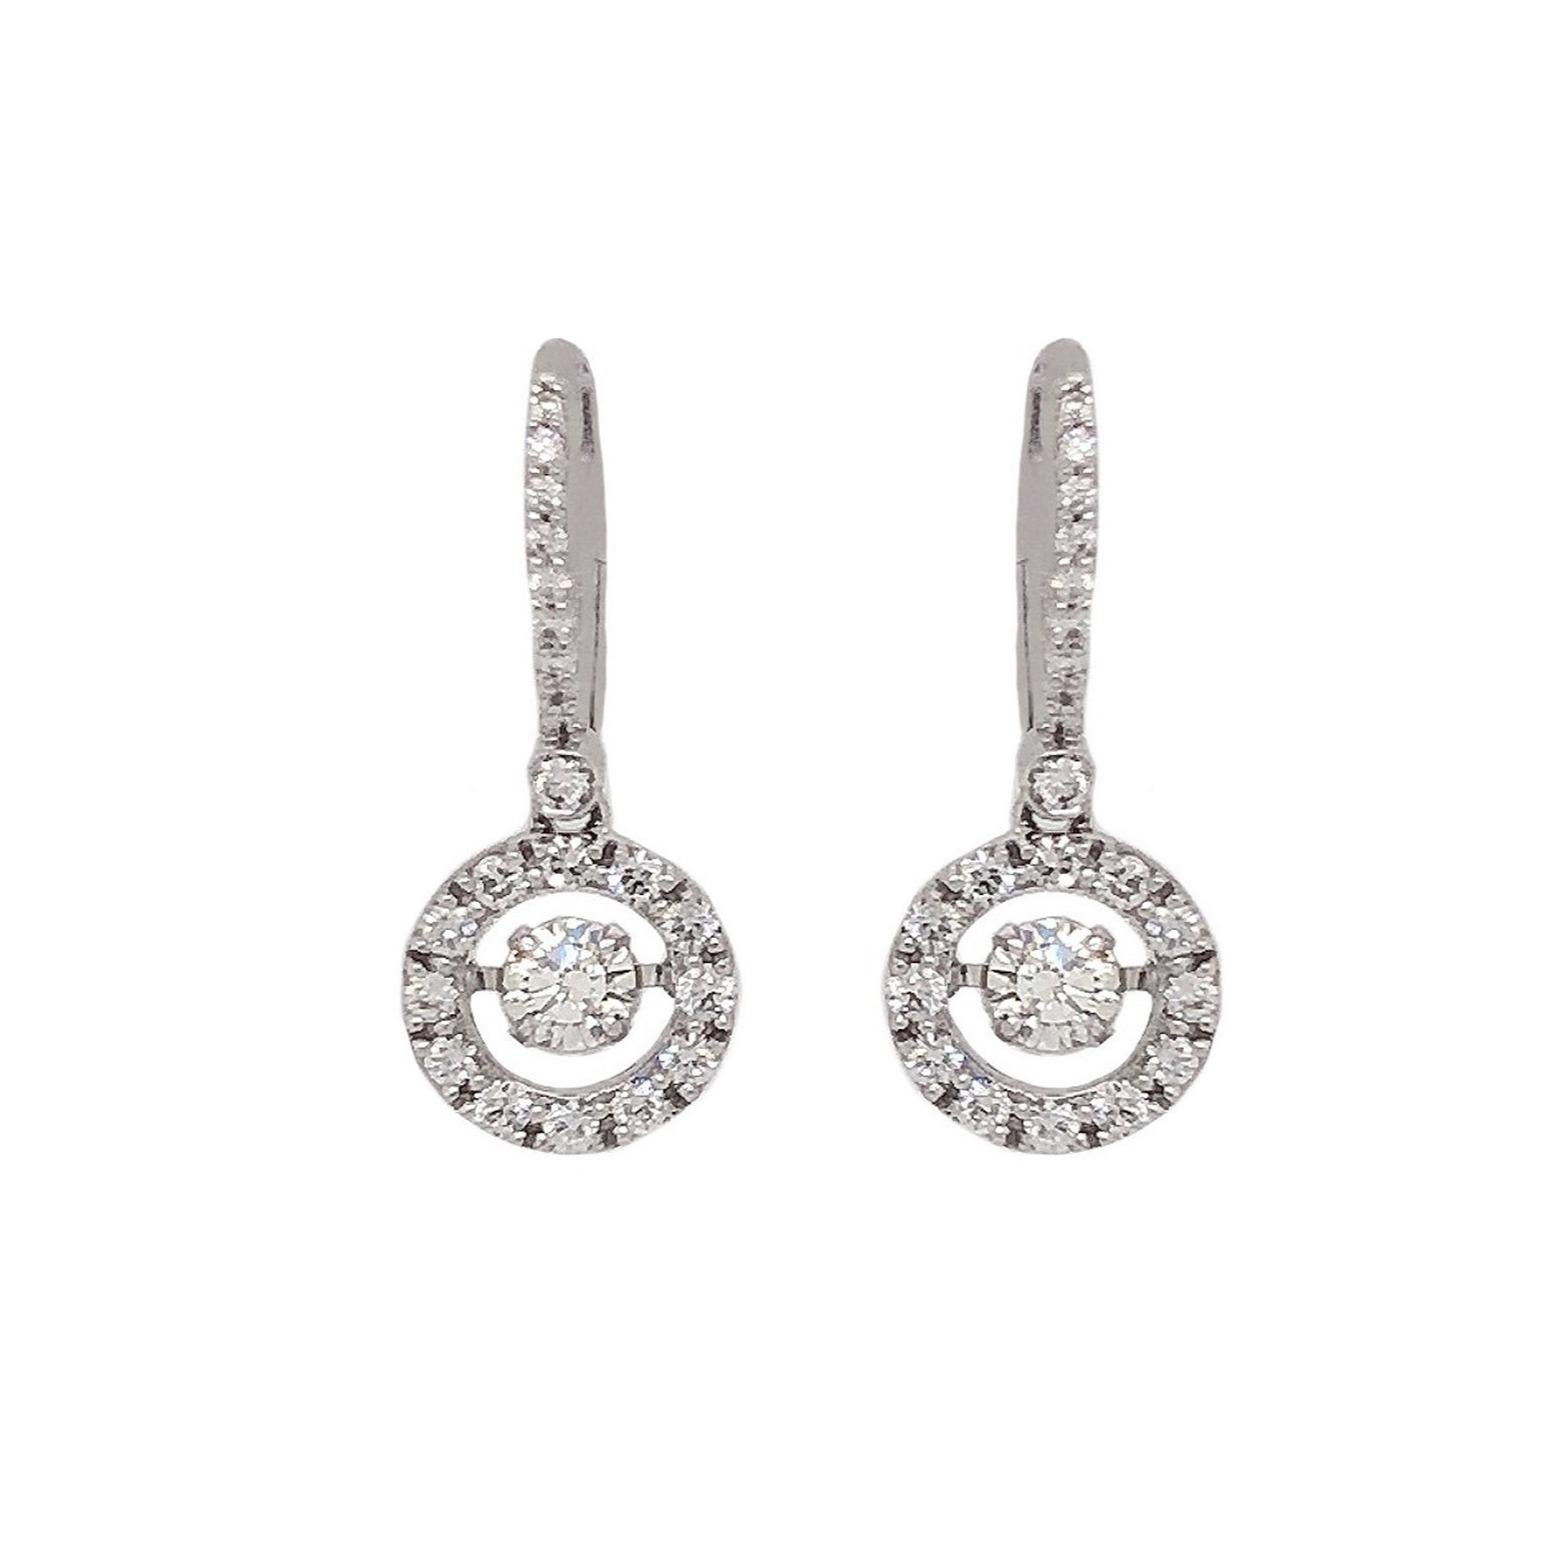 The Christopher Designs Crisscut® Diamond Drop Earring is expertly crafted from 18kt white gold and boasts a lever back adorned with 109-faceted diamonds for a total weight of 0.42cts t.w.
44 = 0.56 cts t.w. Round brilliant cut 
Serial # PCT002357